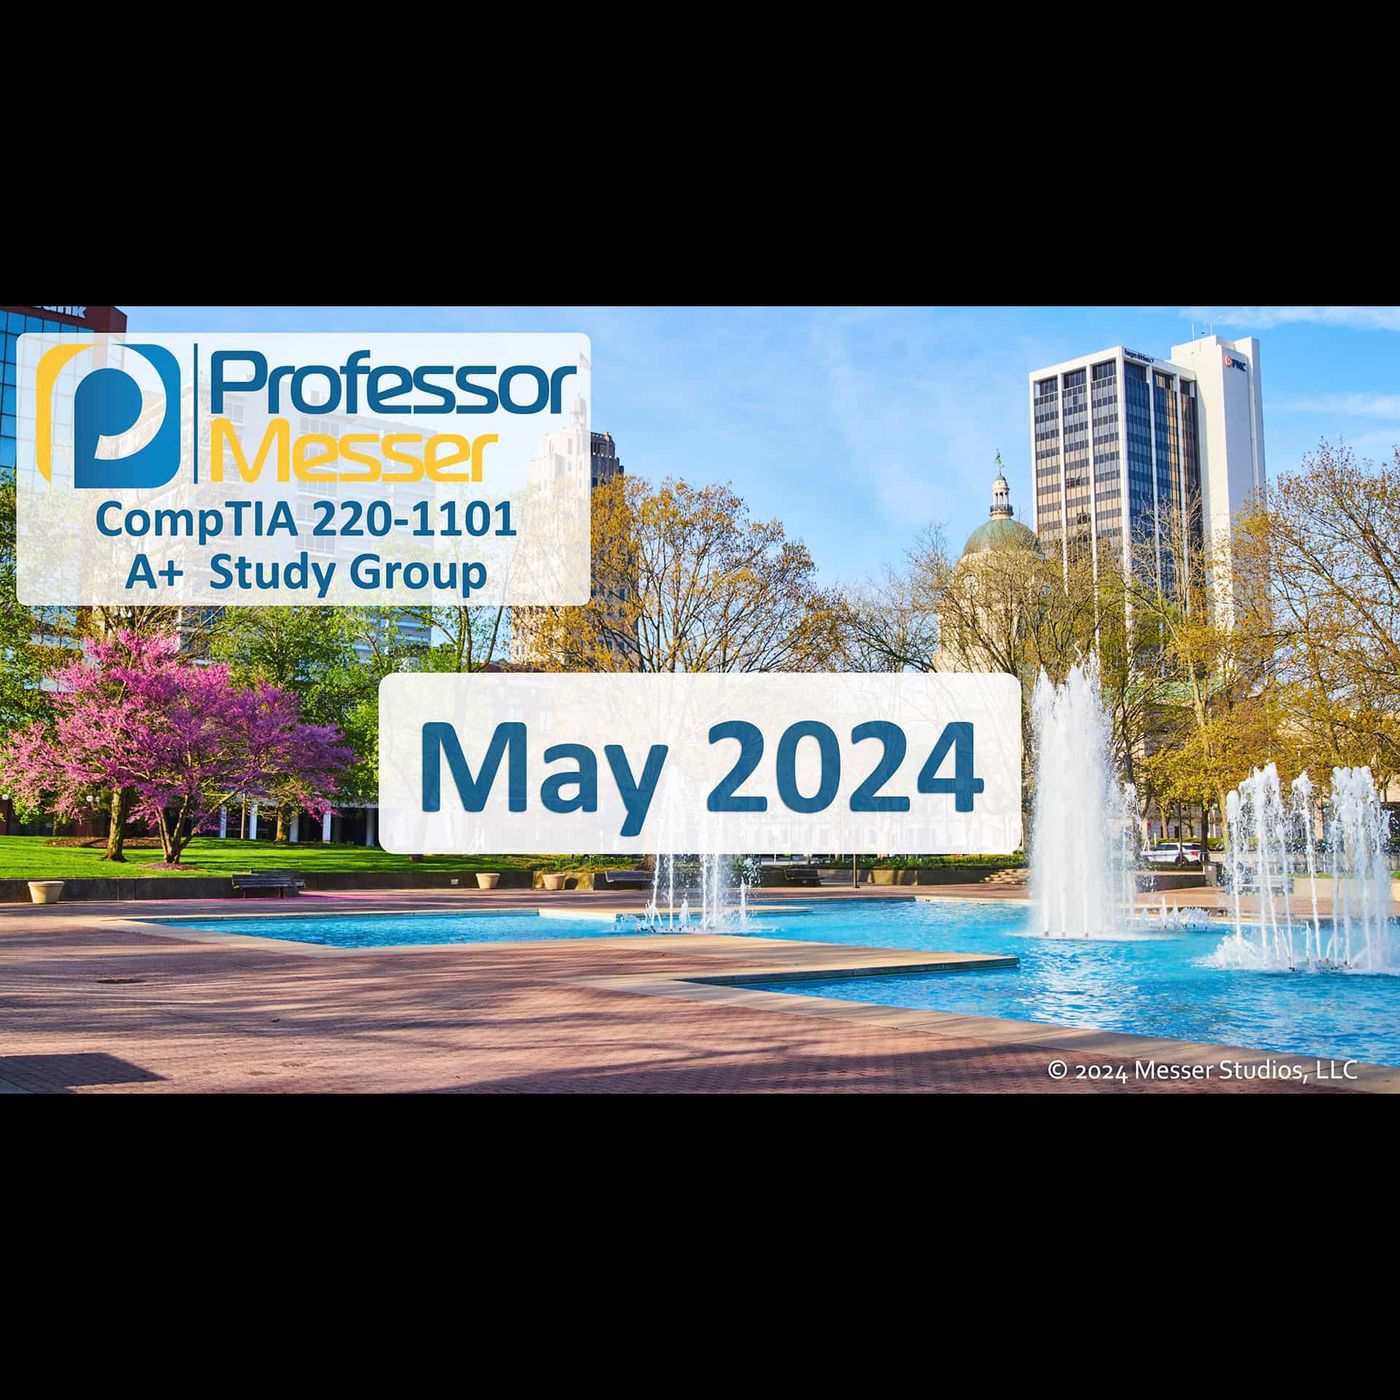 Professor Messer’s CompTIA 220-1101 A+ Study Group After Show - May 2024